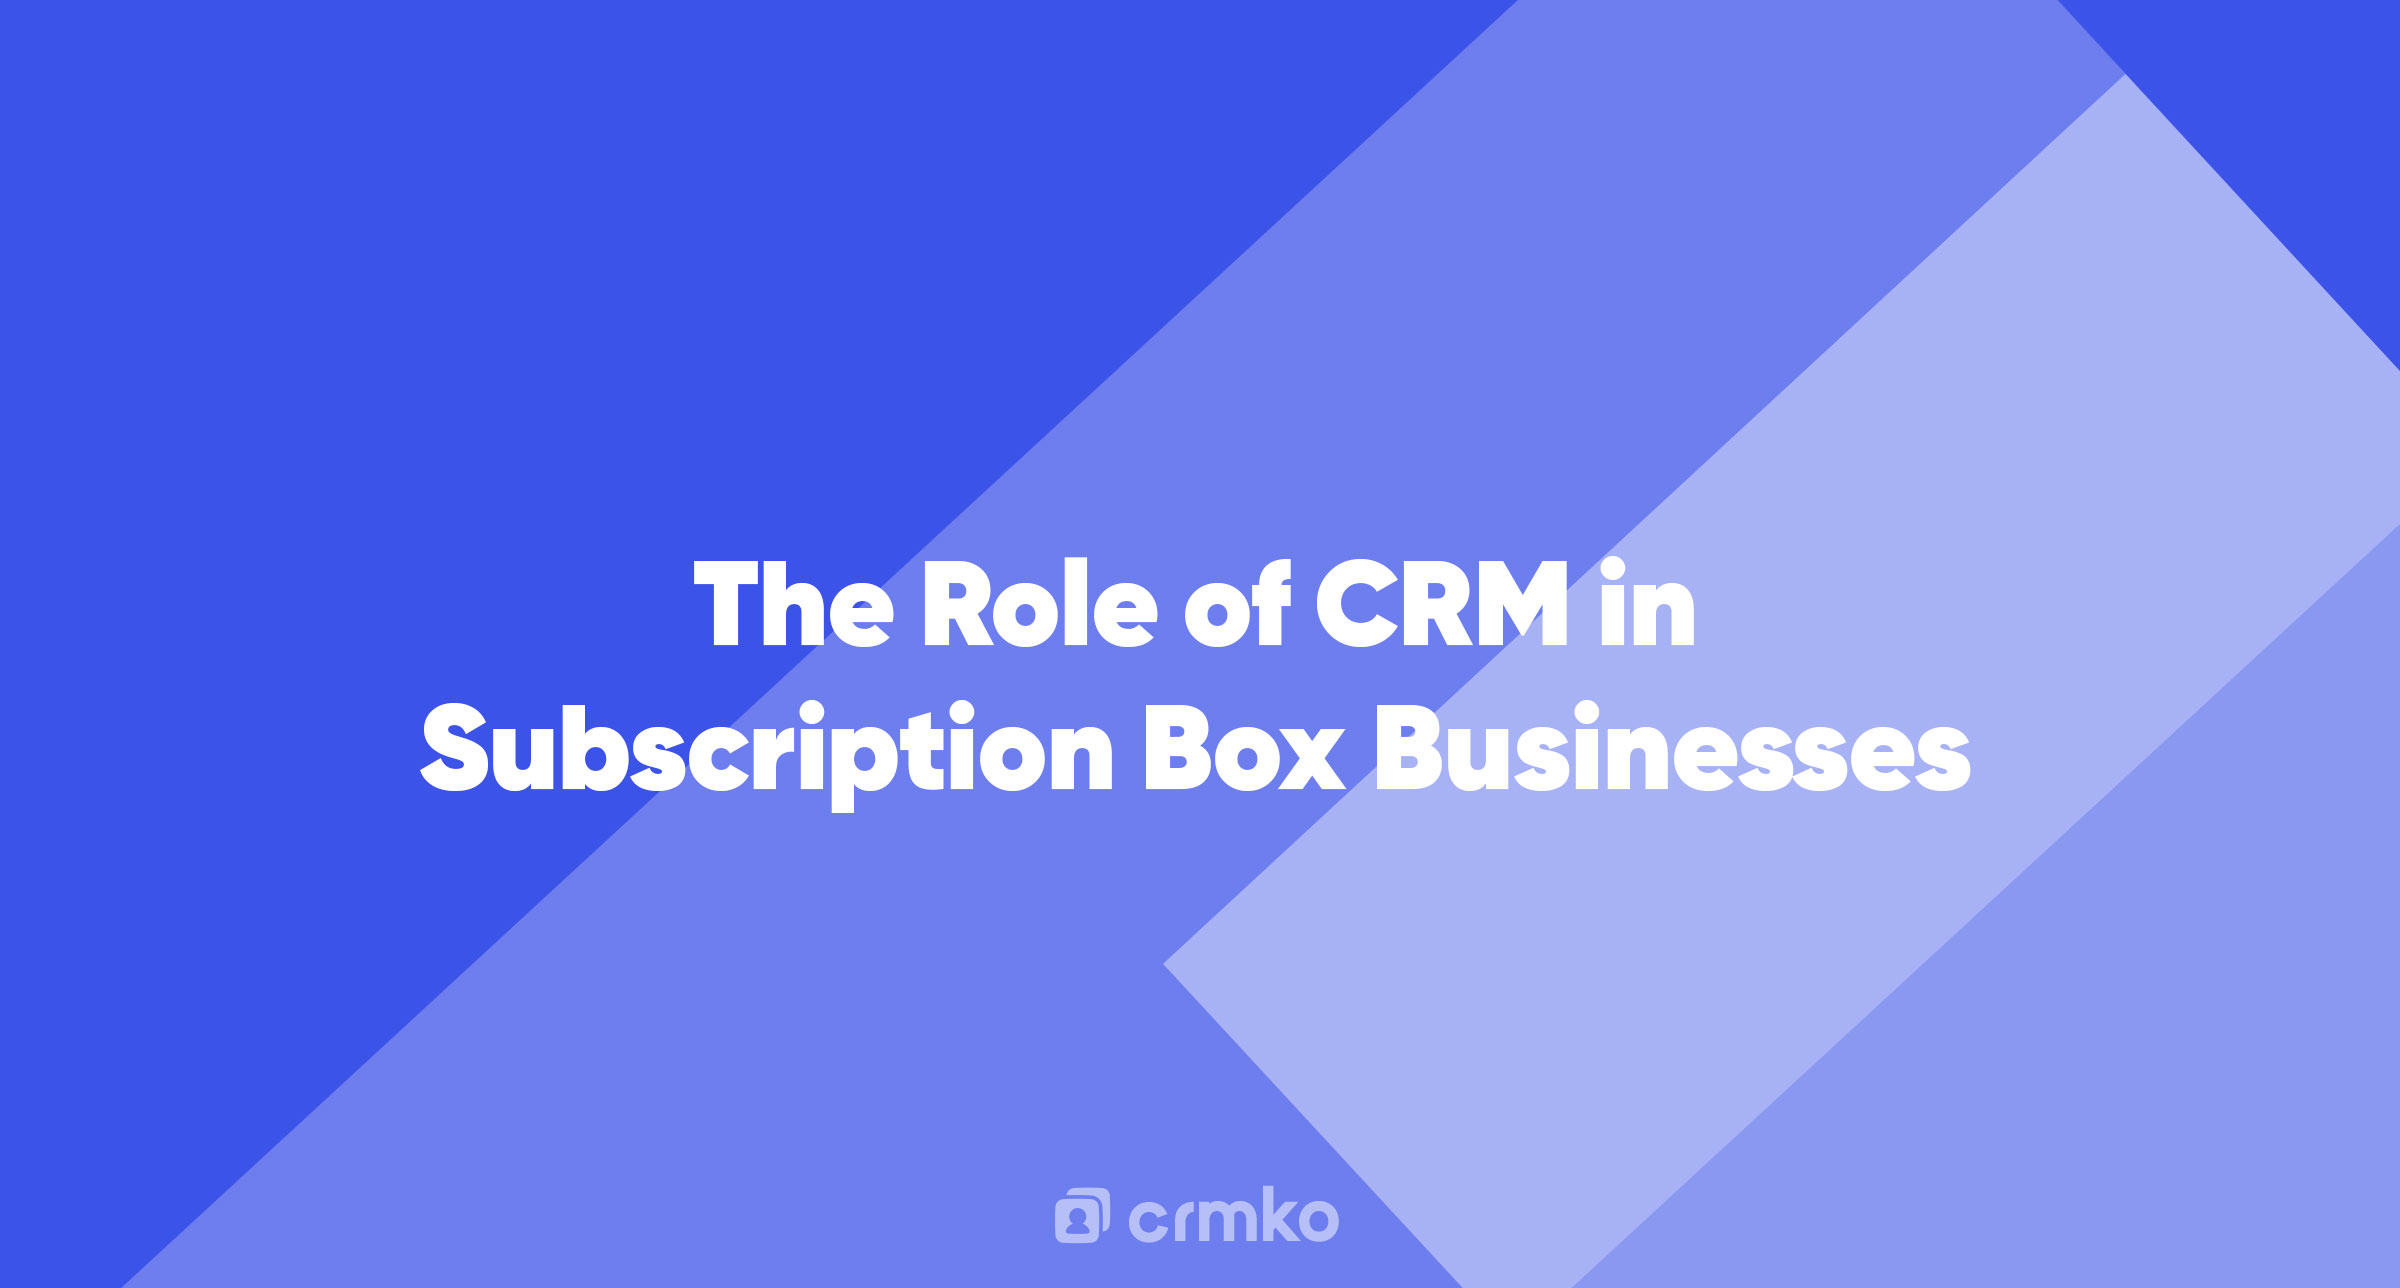 Article | The Role of CRM in Subscription Box Businesses